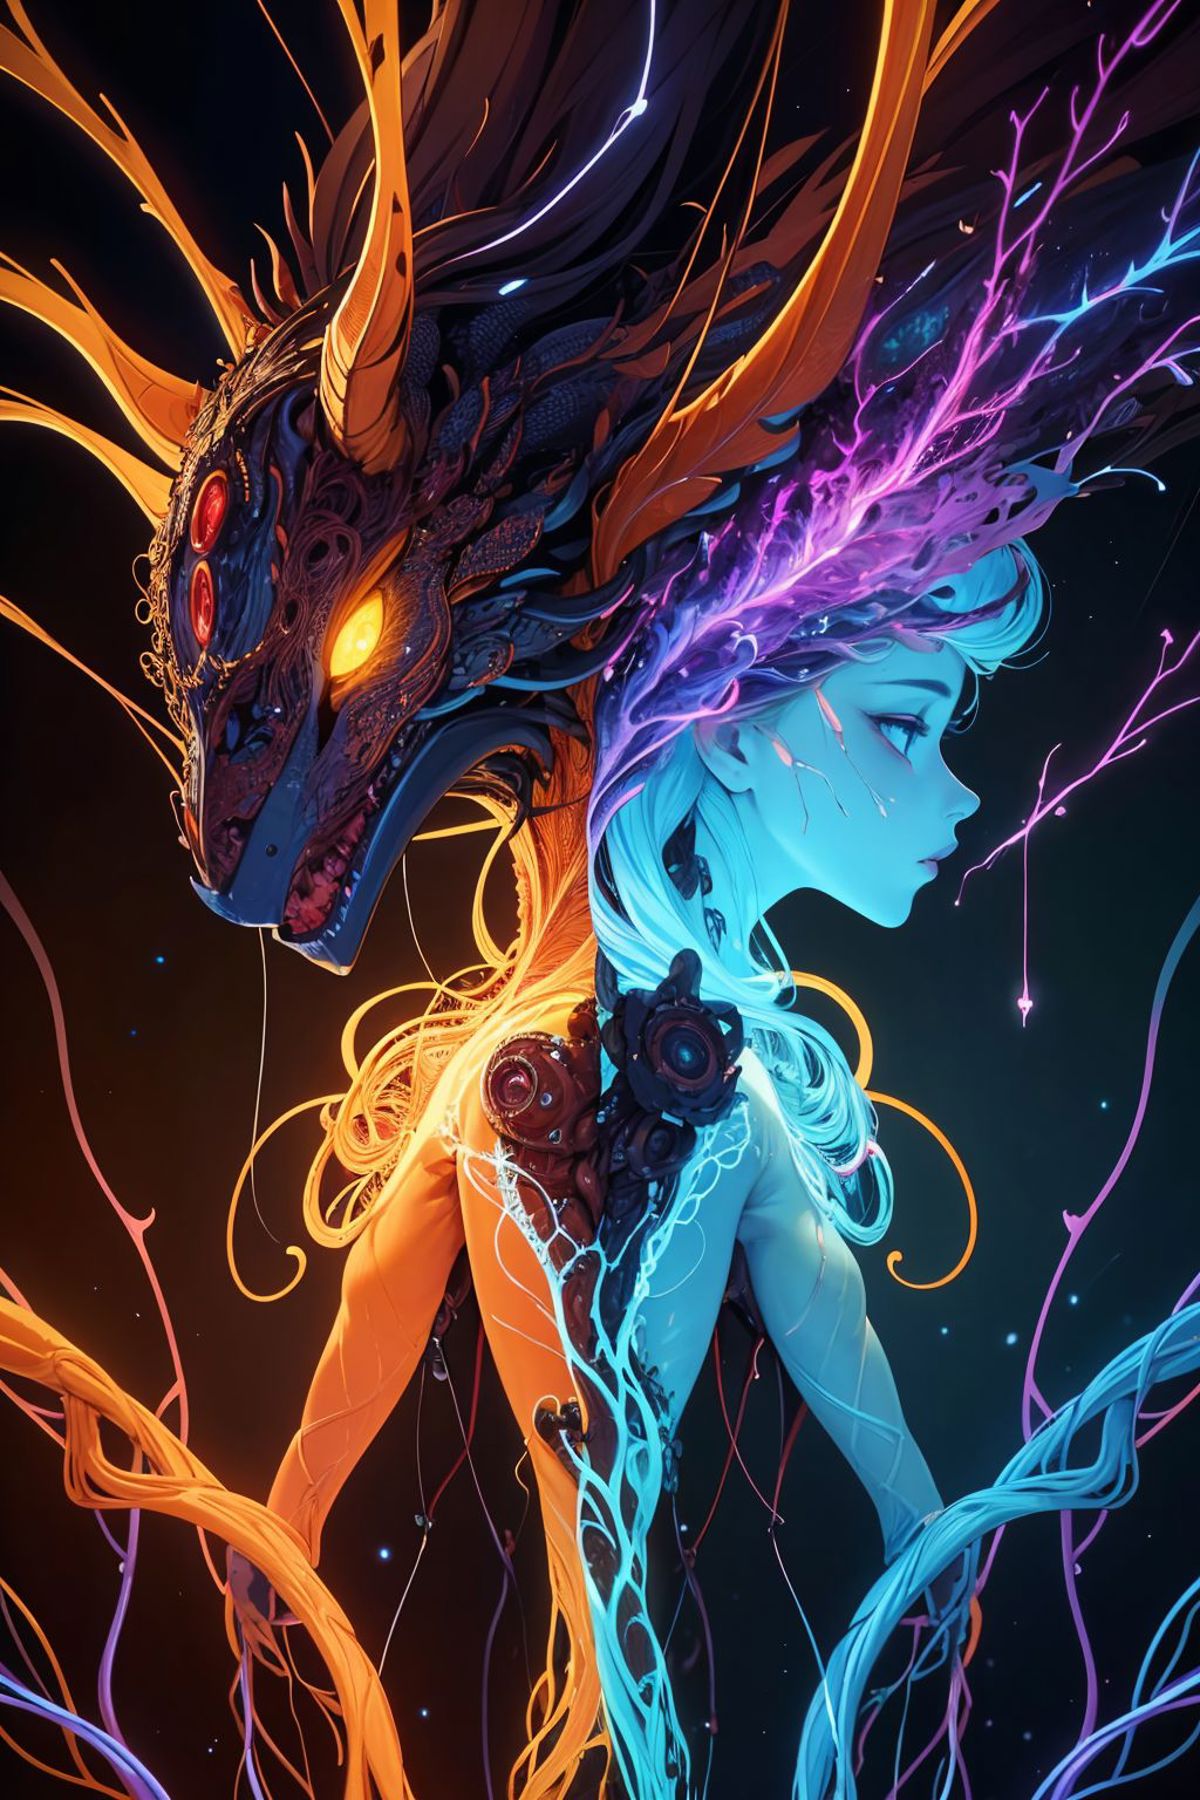 A colorful artwork featuring a woman's face and a dragon's face.